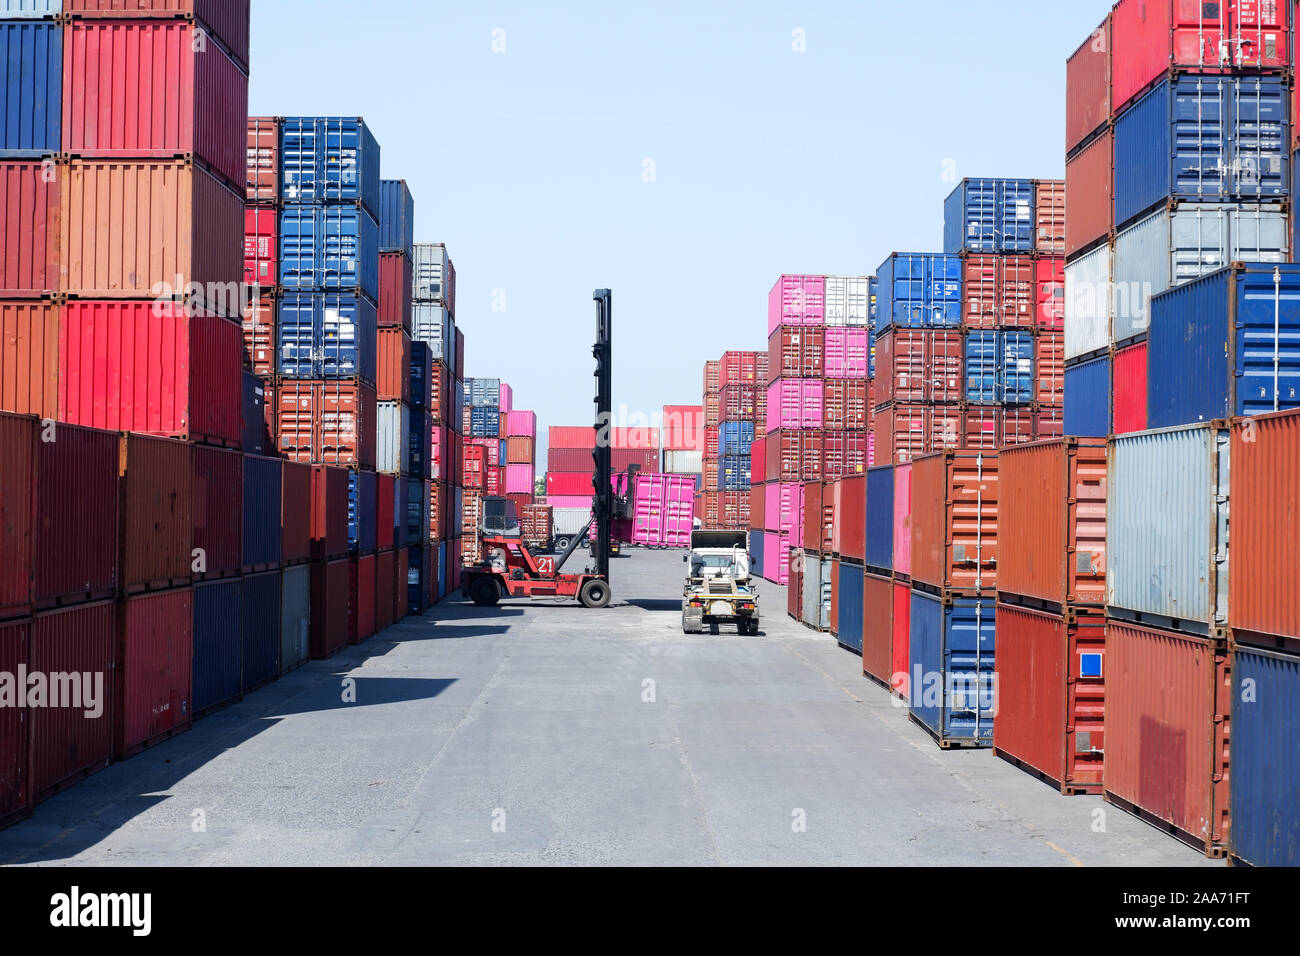 Container handlers In the shipping dock with storage cabinet background, industrial ideas Import and export Stock Photo